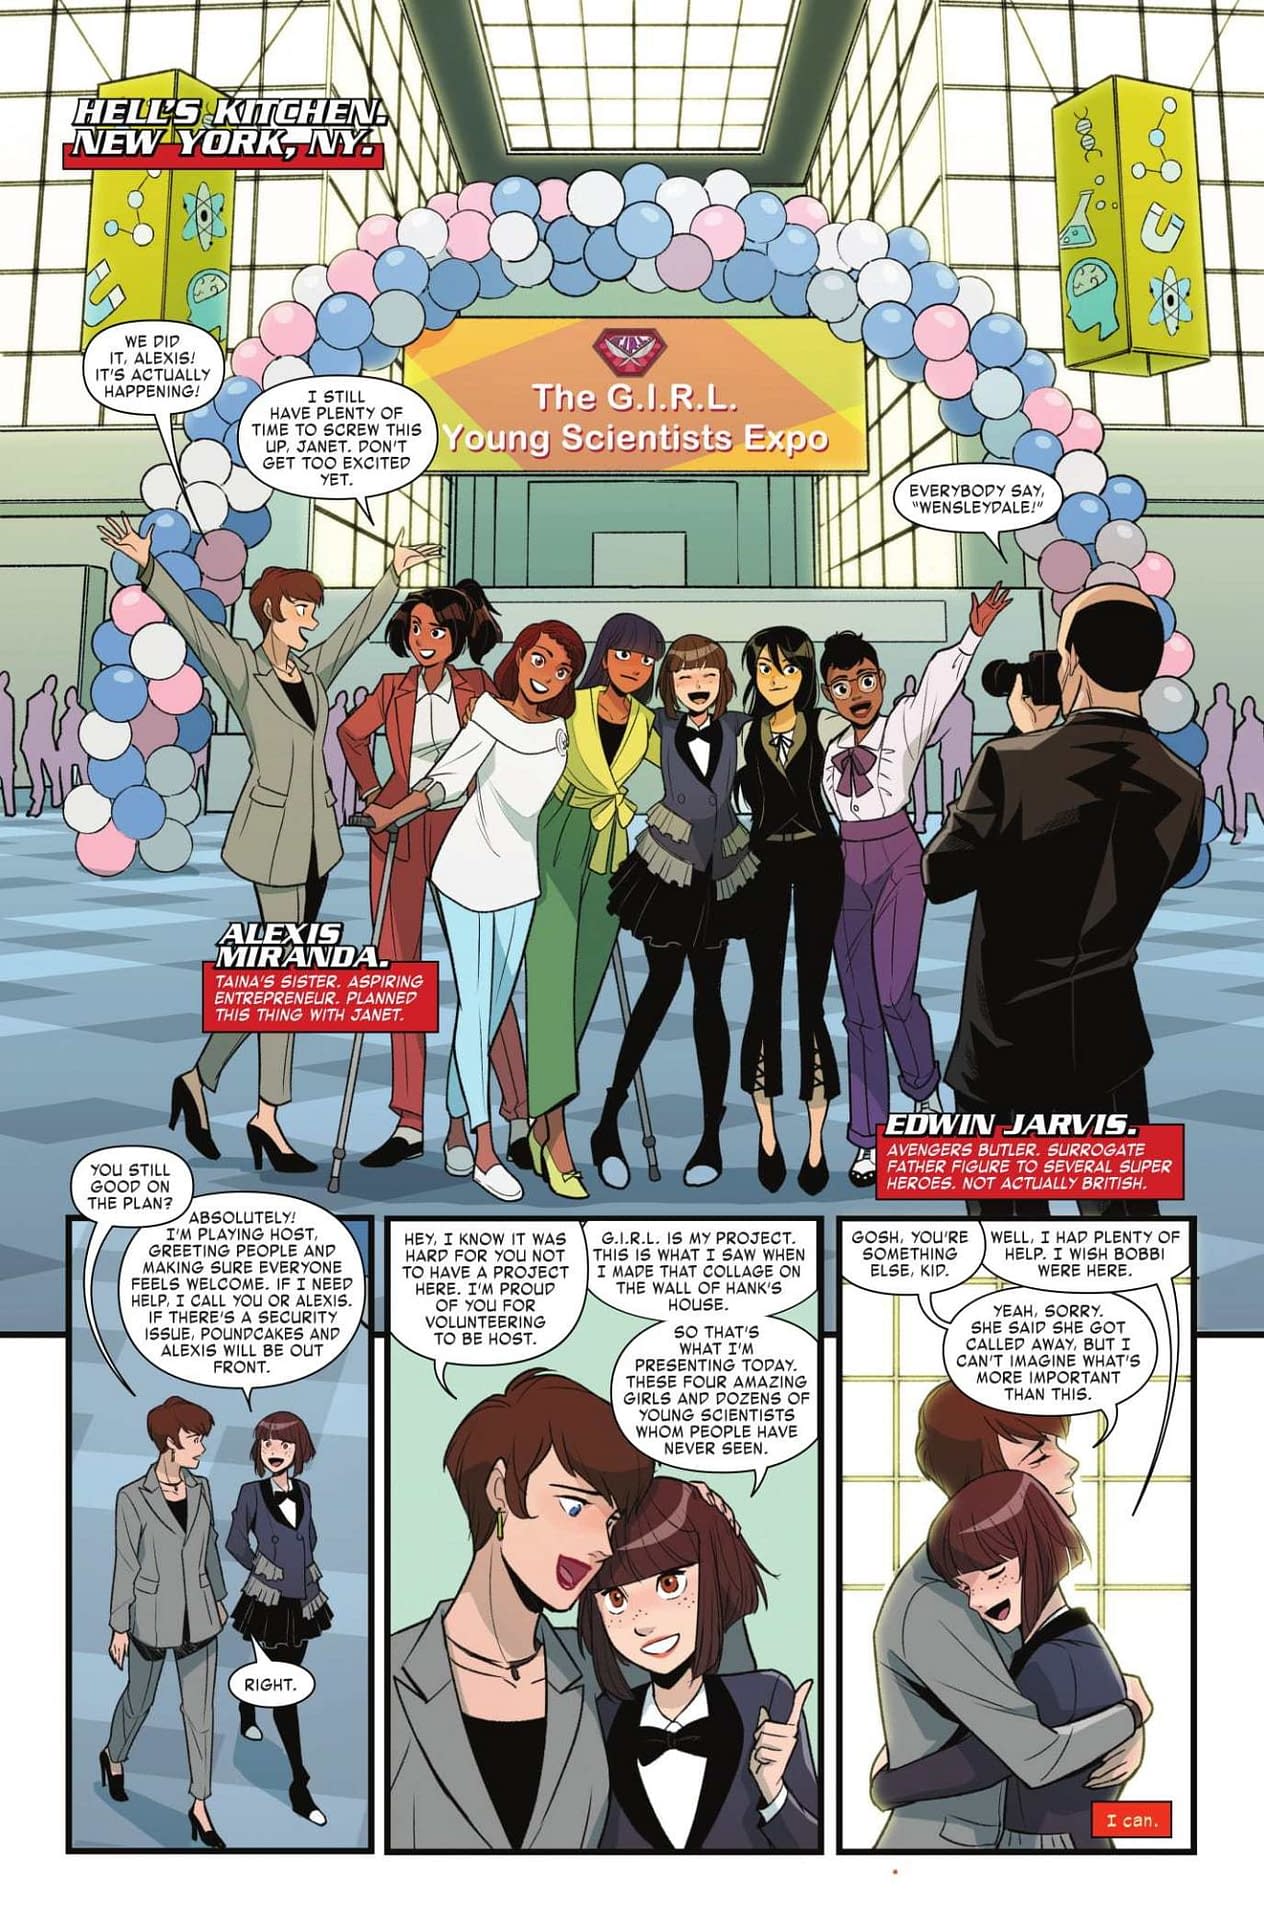 Does Winter Soldier Think He's Wolverine? Unstoppable Wasp #8 Preview